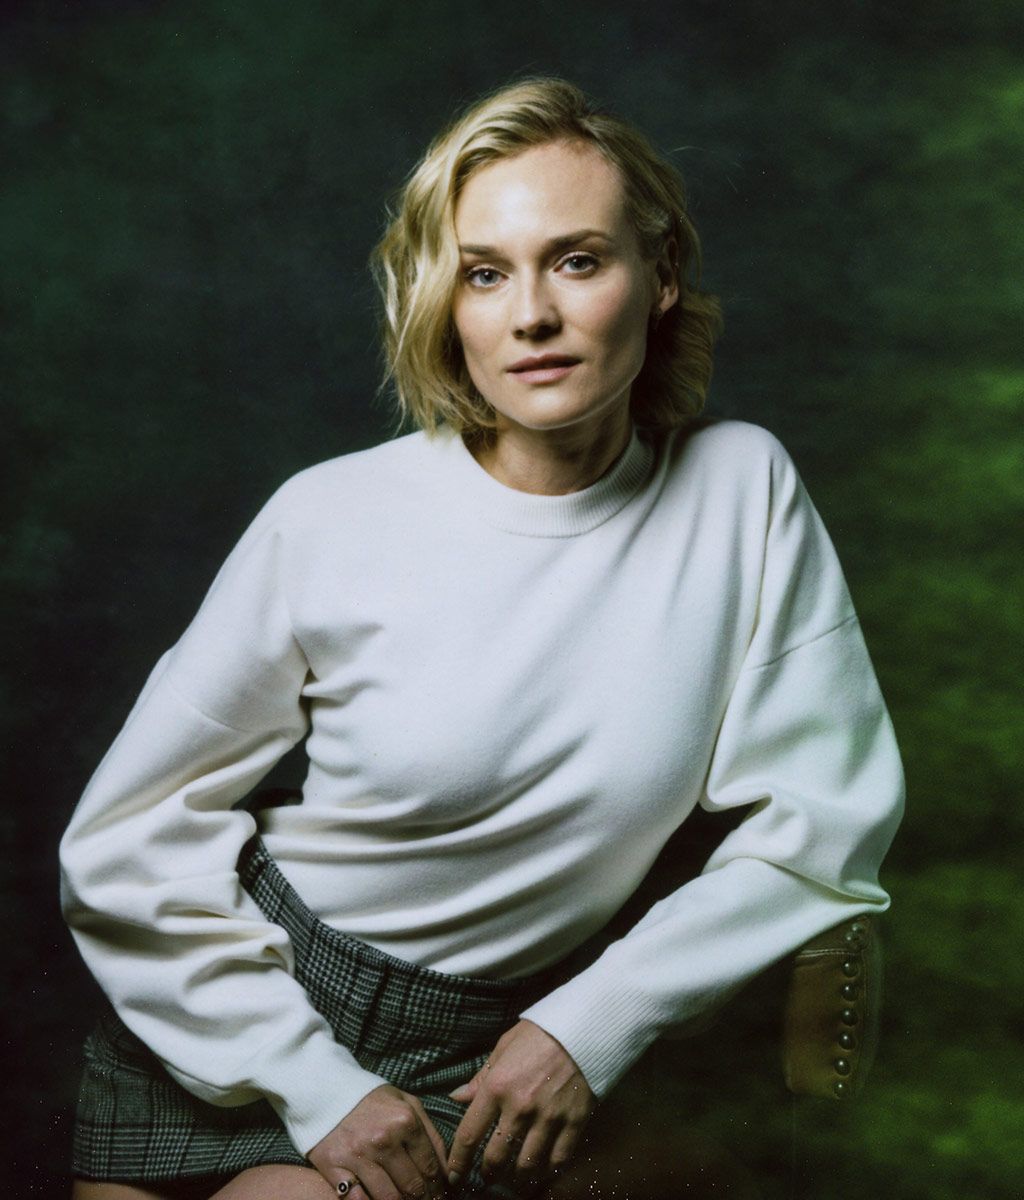 Diane Kruger on Modeling, Her Beau, and More - Daily Front Row